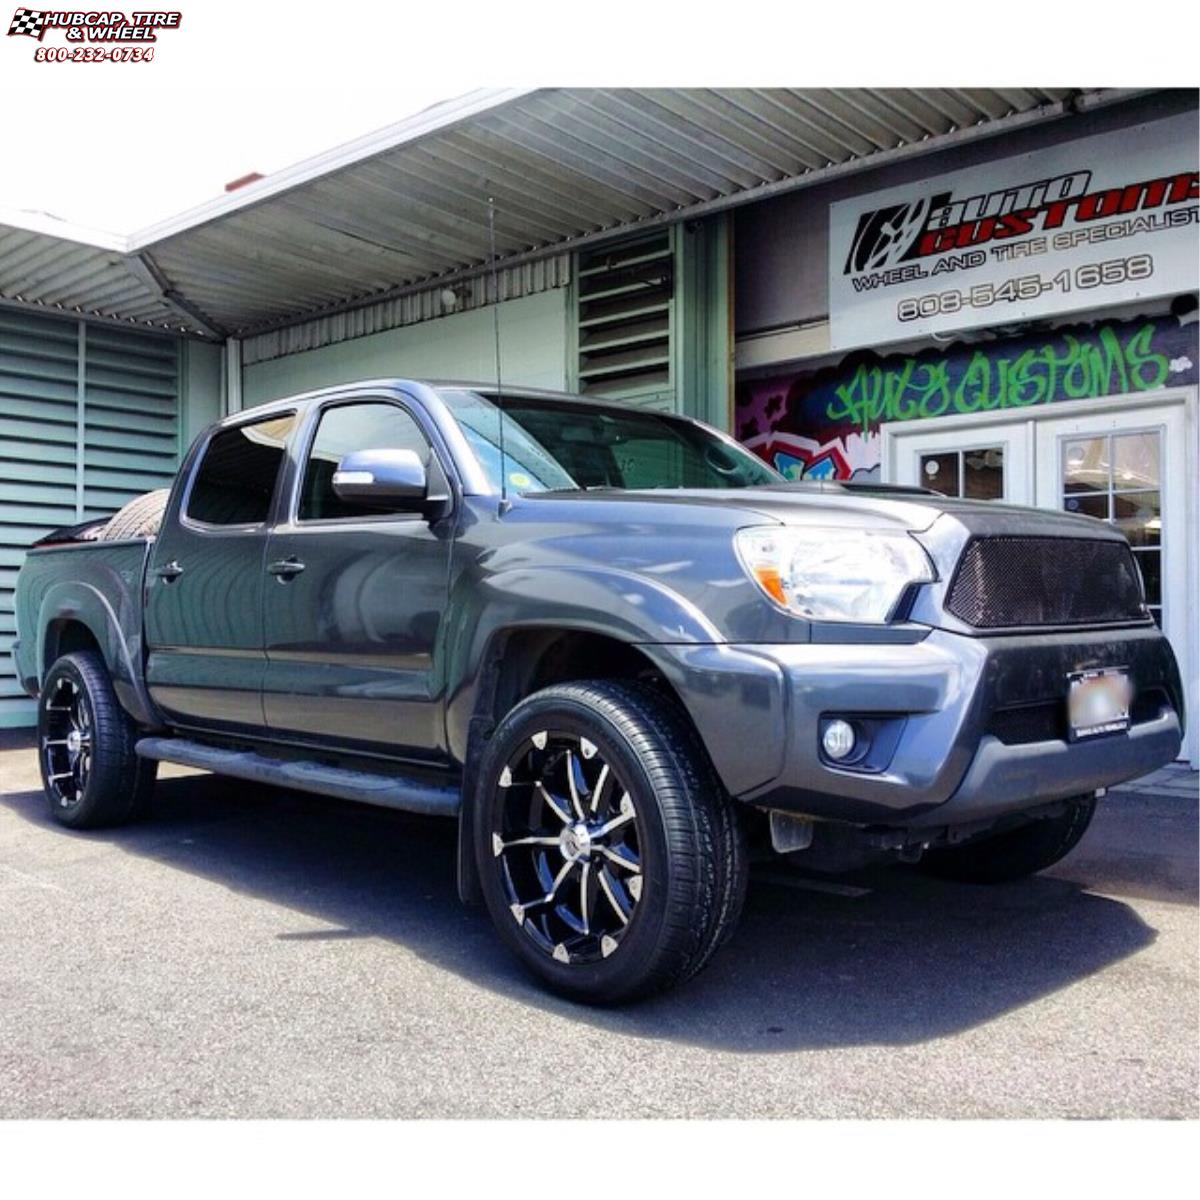 vehicle gallery/2015 toyota tacoma xd series xd779 badlands x  Gloss Black Machined wheels and rims